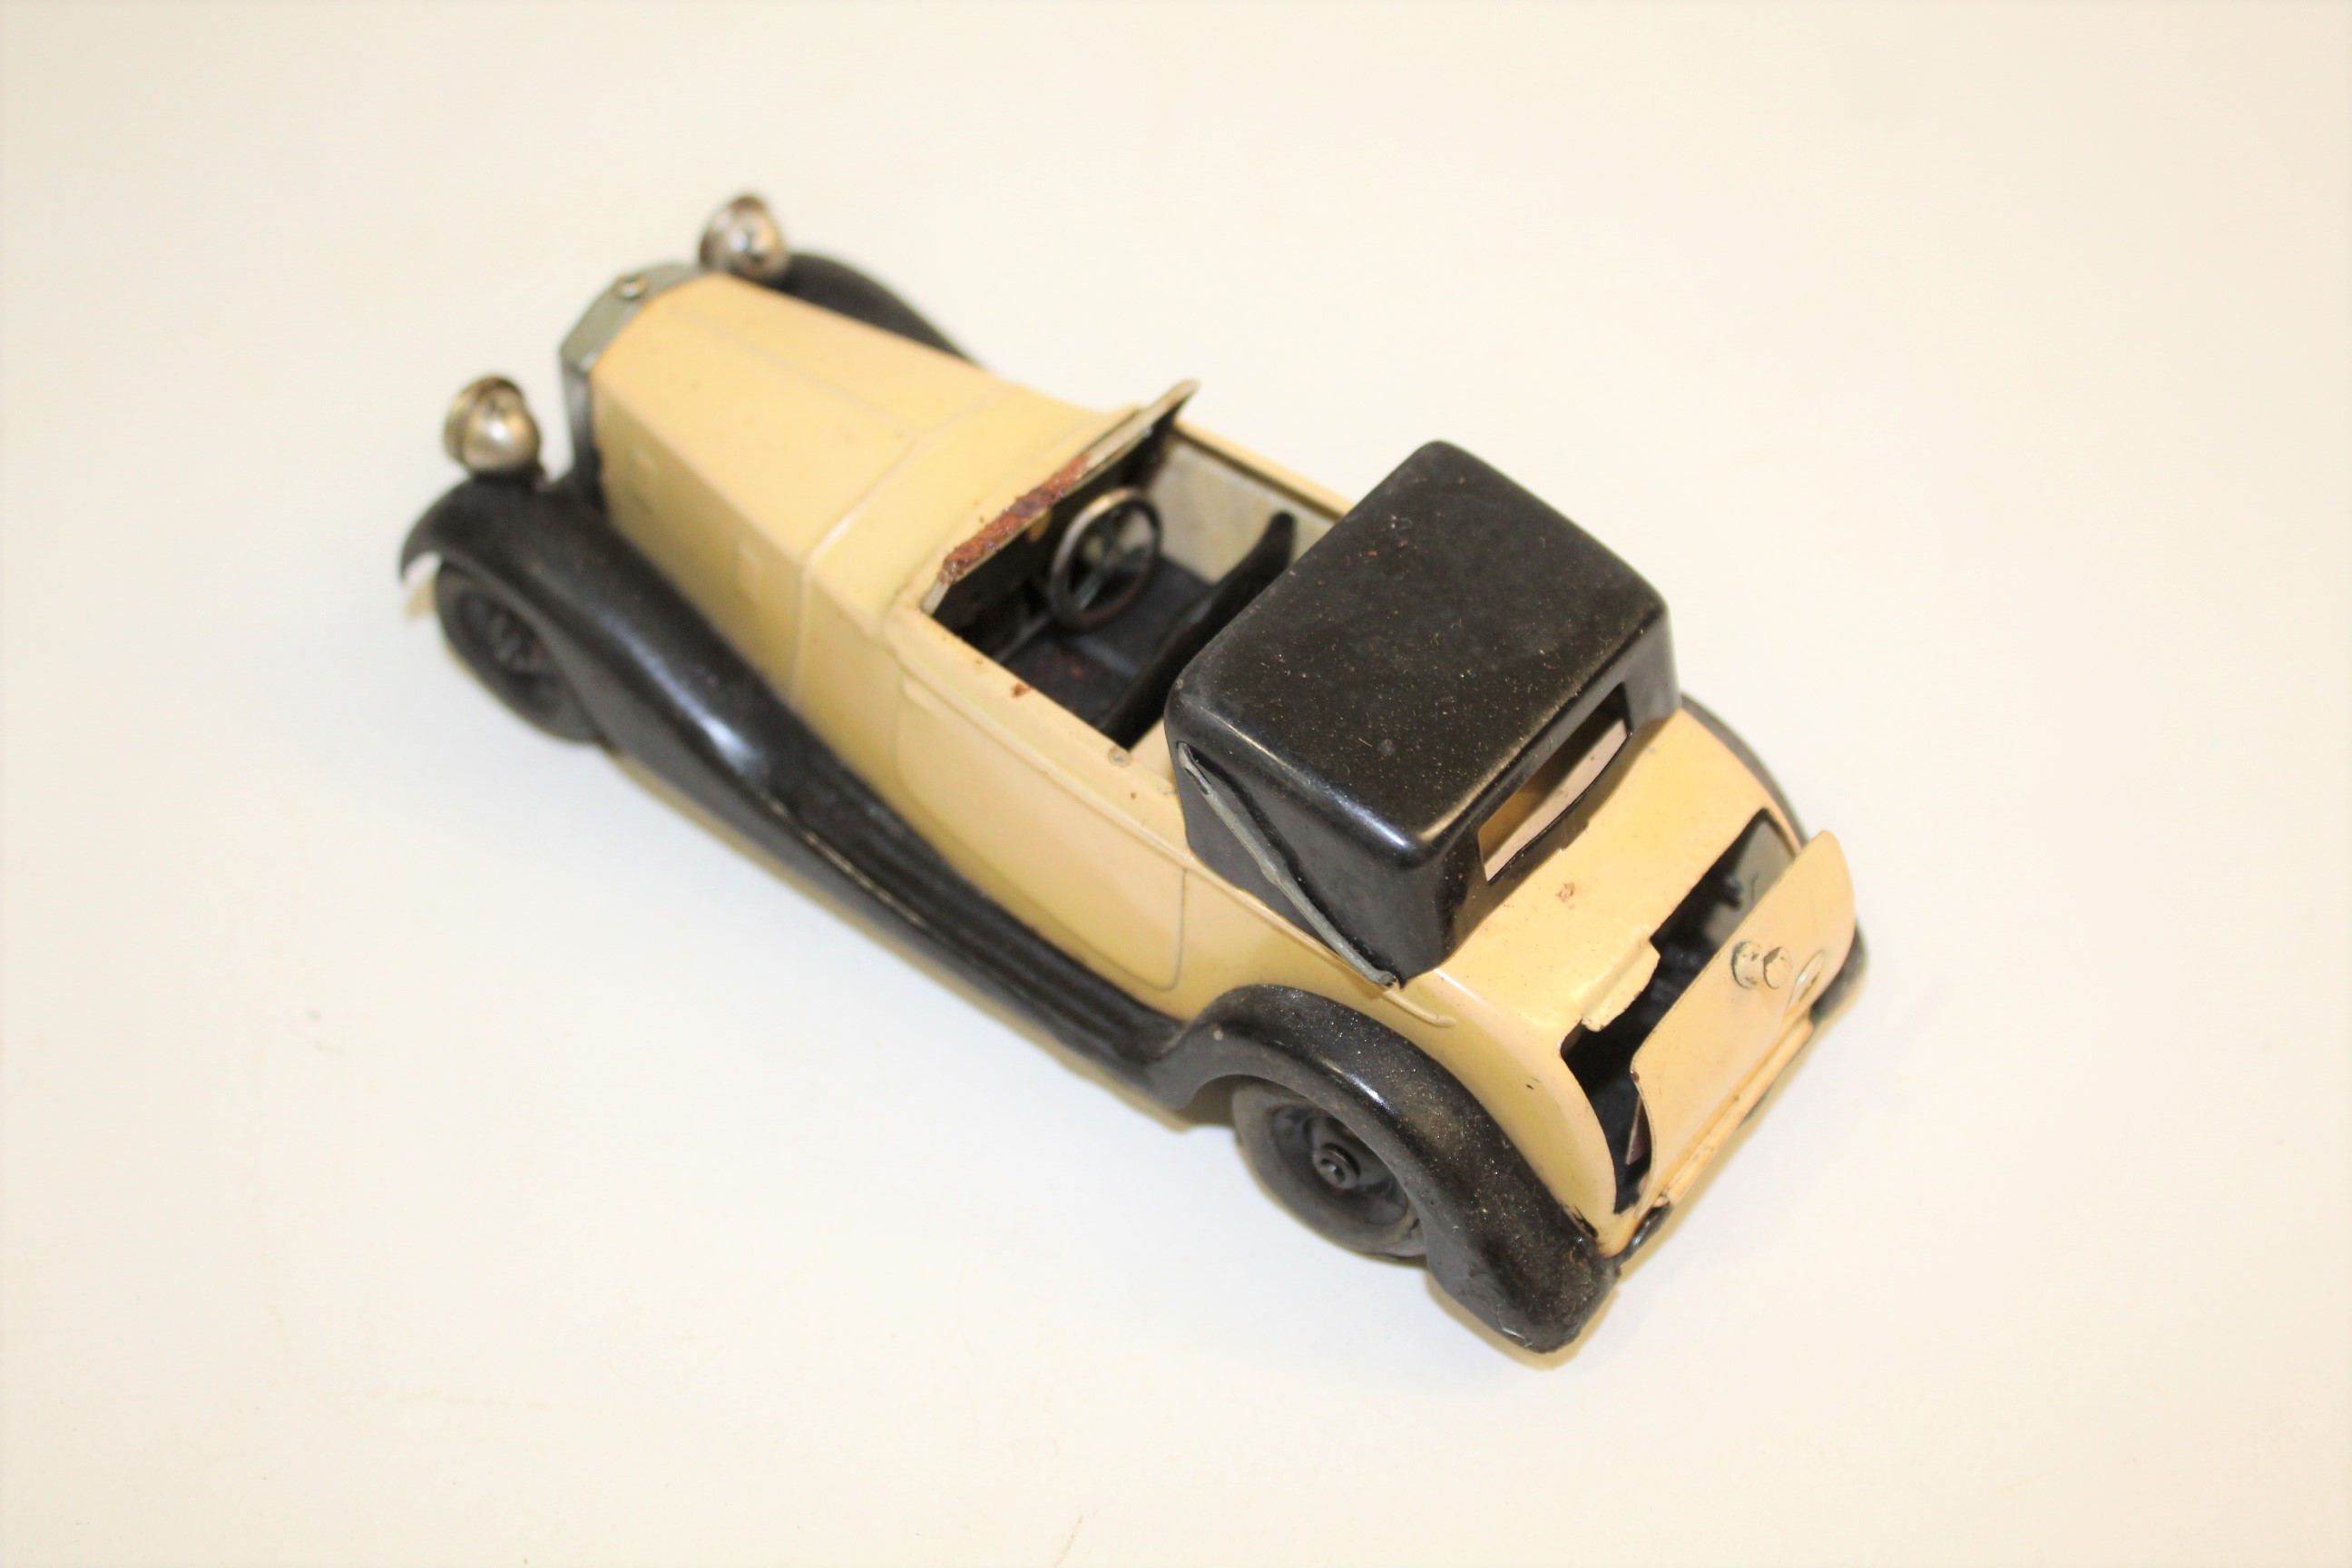 RARE TRIANG MINIC ROLLS ROYCE SEDANCA - ELECTRIC HEADLAMPS Model No 50M, with a black hood and wings - Image 3 of 14